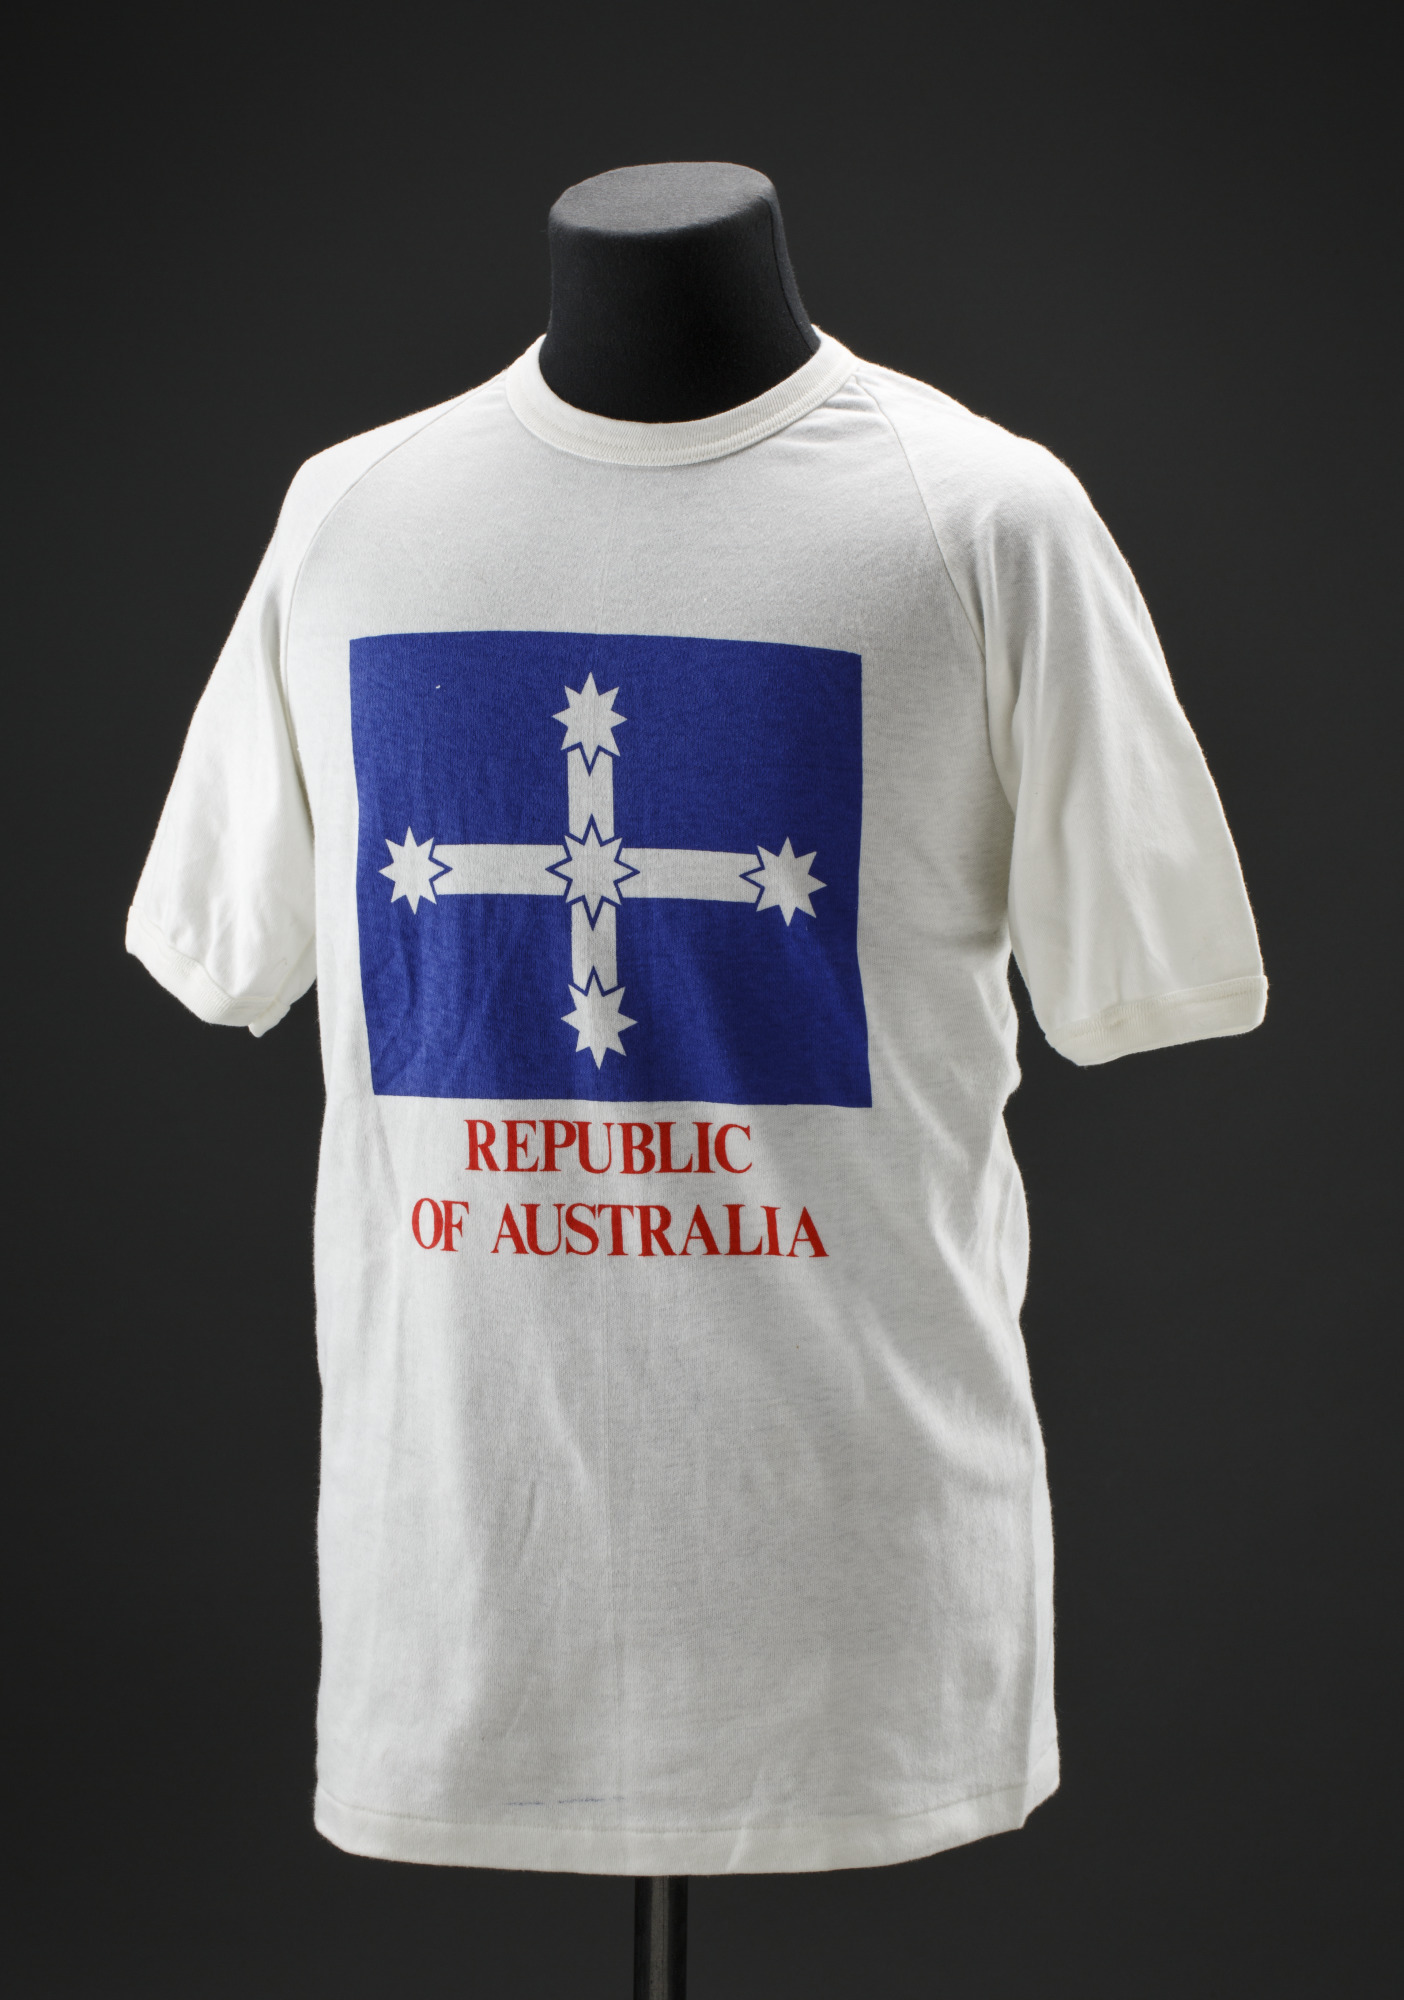 White t-shirt depicting the Eureka flag, with ‘REPUBLIC OF AUSTRALIA’ printed below in red.